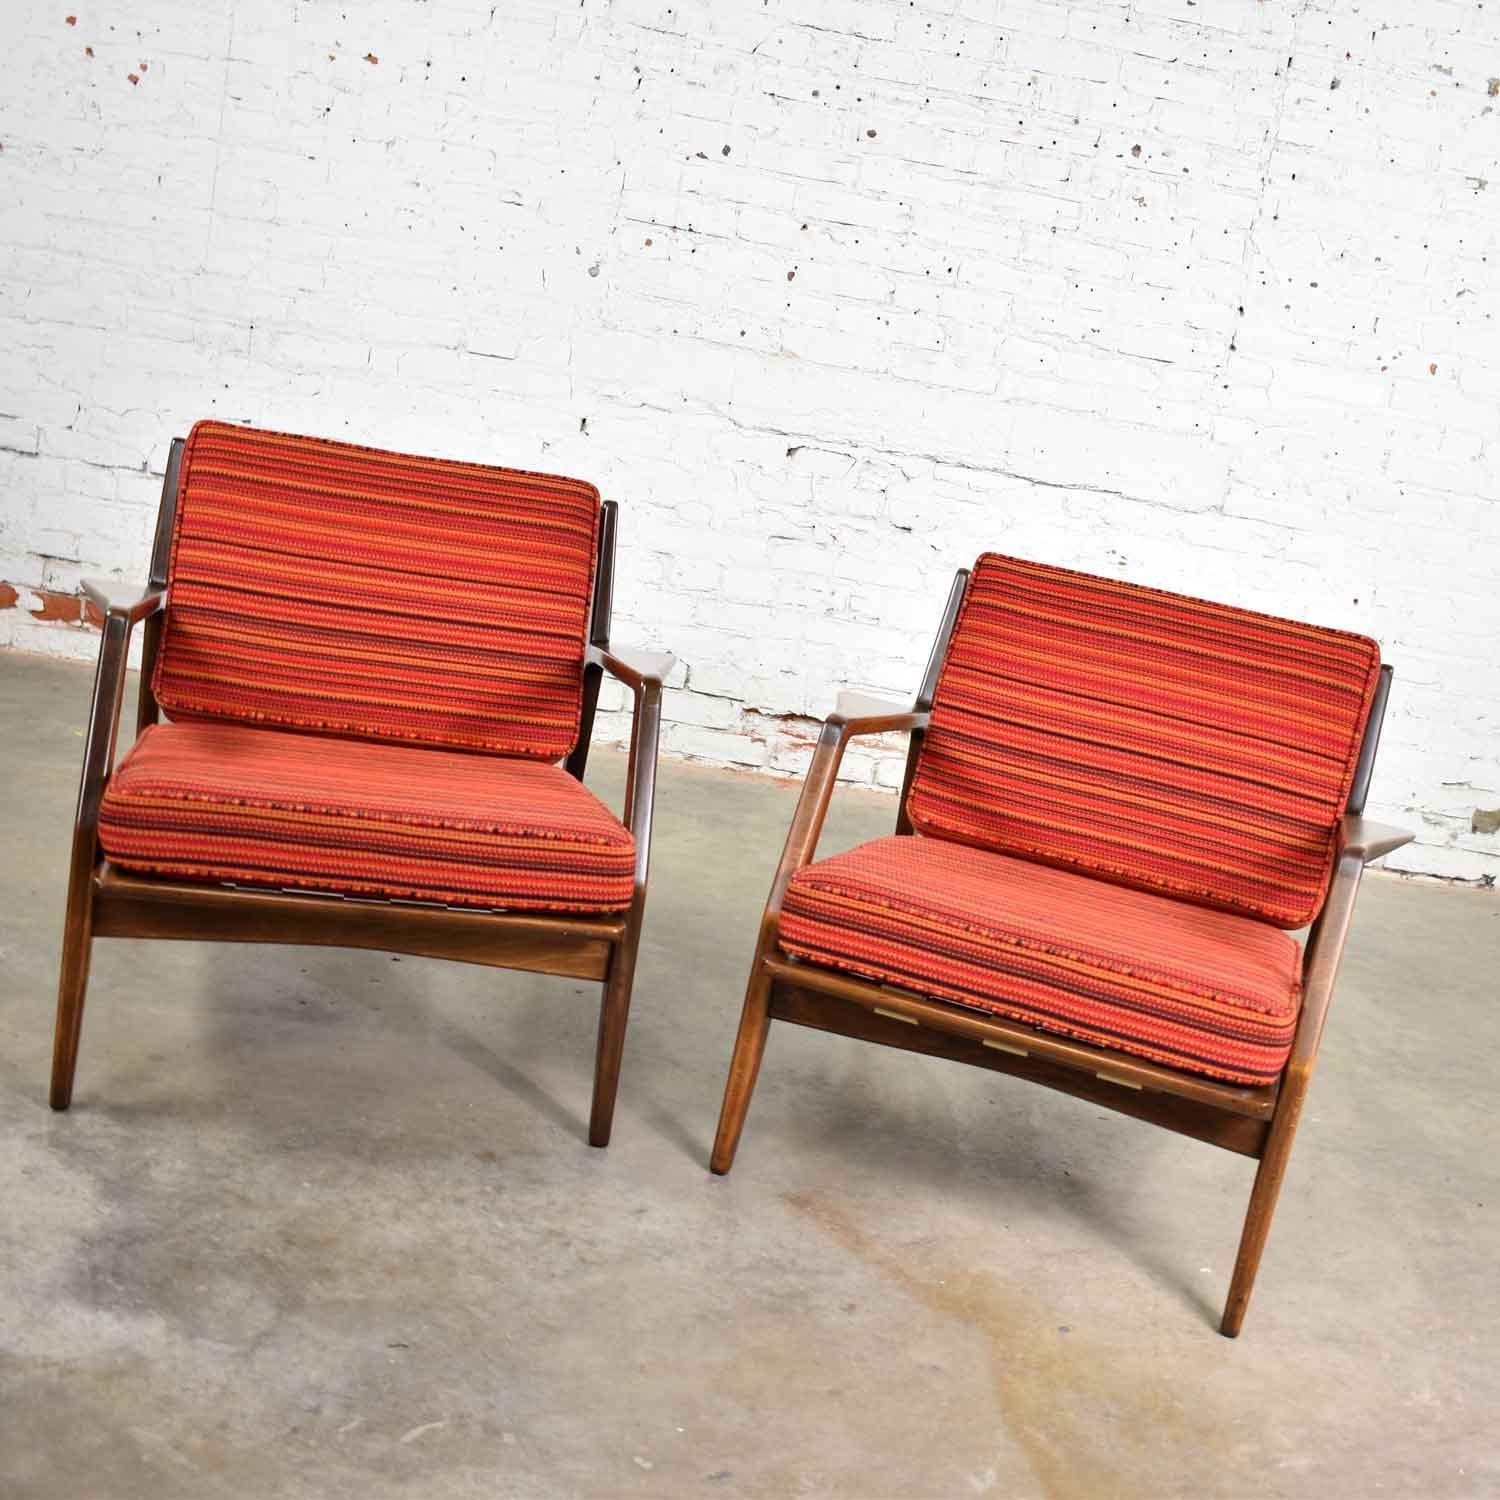 Handsome pair of Scandinavian Modern Selig lounge chairs designed by Ib Kofod-Larsen. They are in wonderful restored condition. The frames have been refinished, the strapping is new, and new cushions have been made and upholstered in a NOS (new old